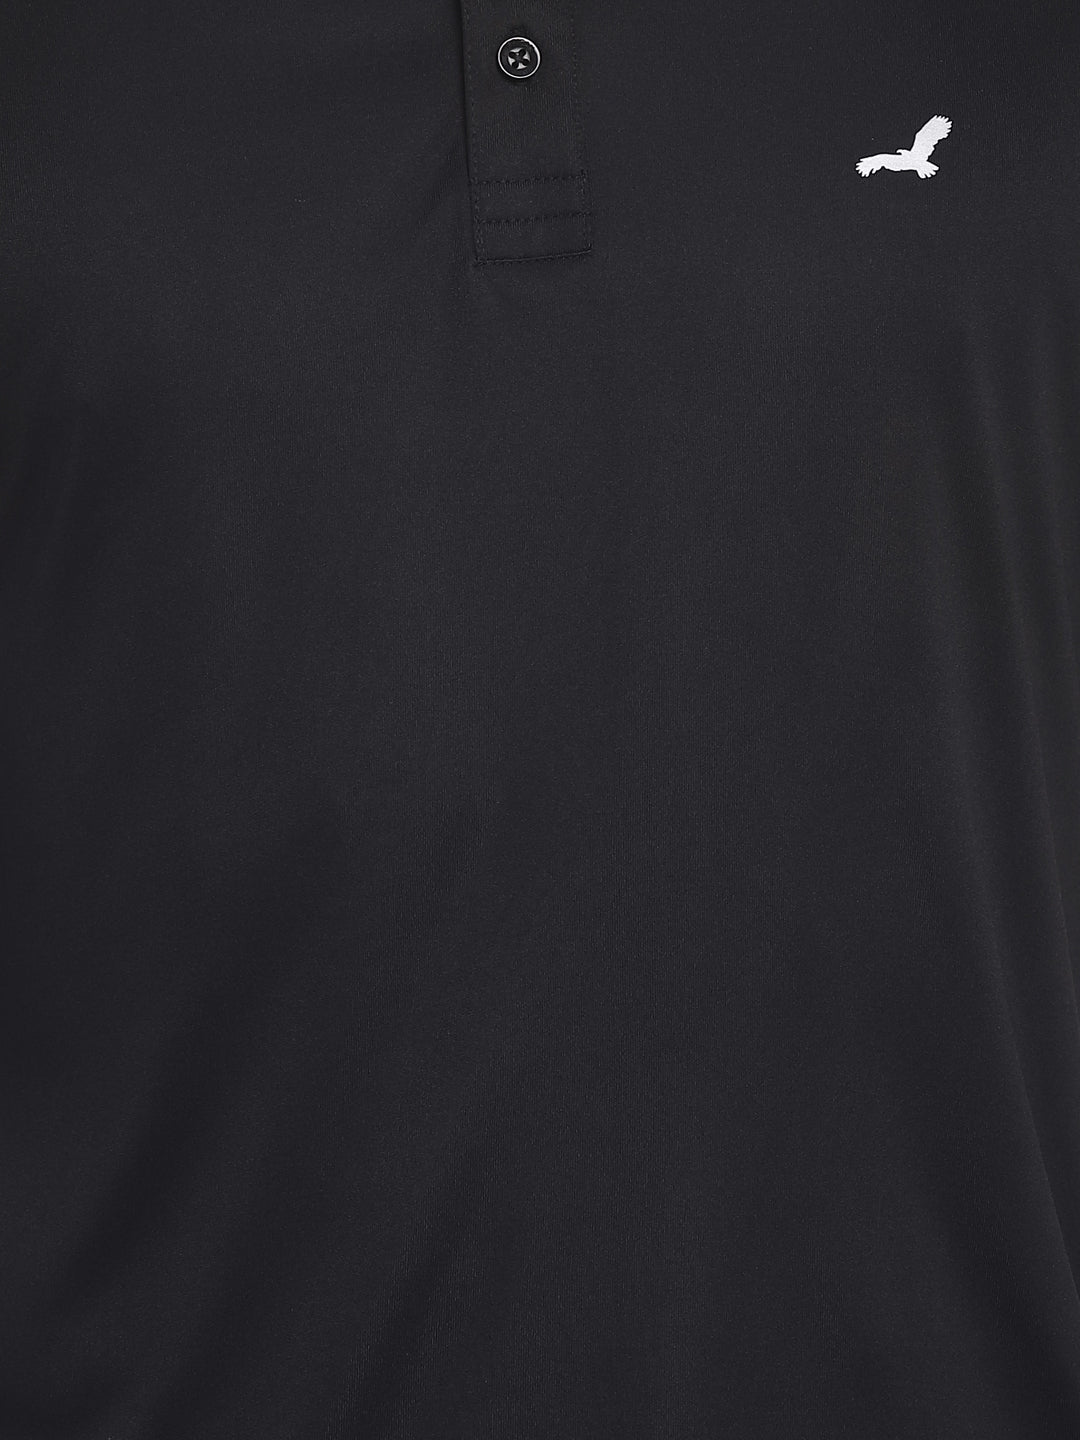 Activewear: Kooltex Sports Polo T-Shirts For Men with Reflective Details - Black